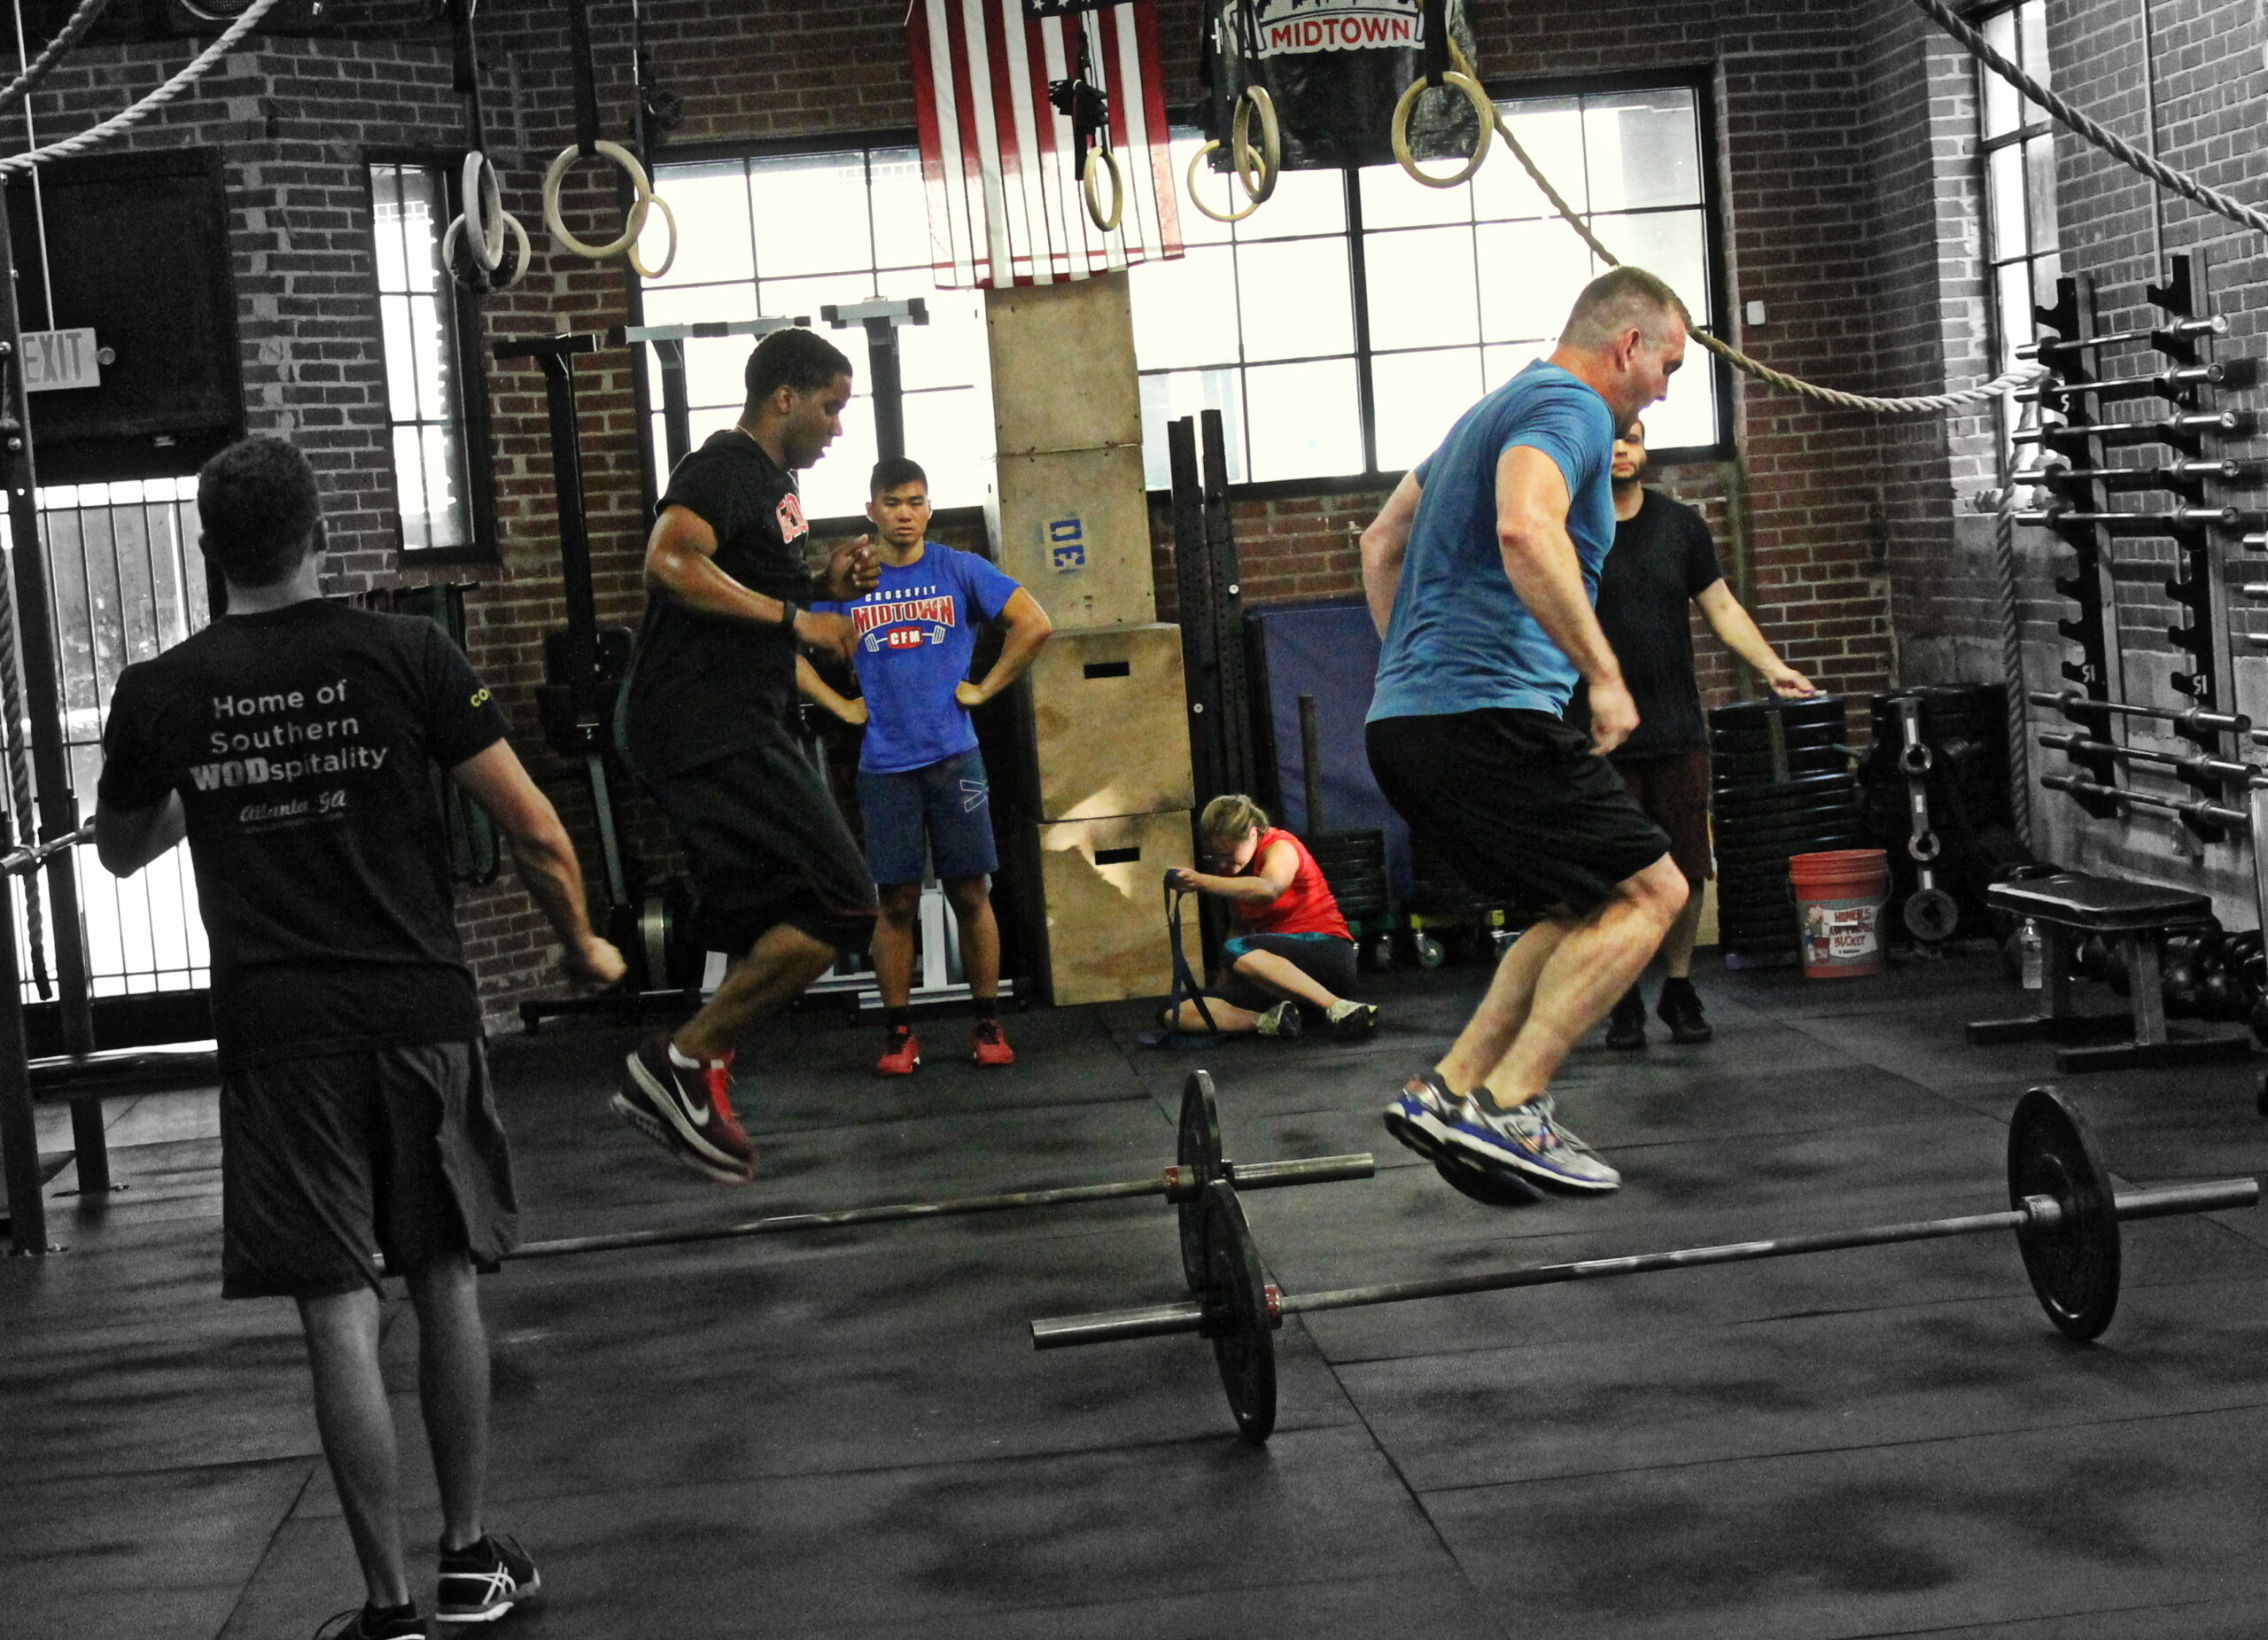 Ryan & Rick. Race to finish barbell lateral hops.